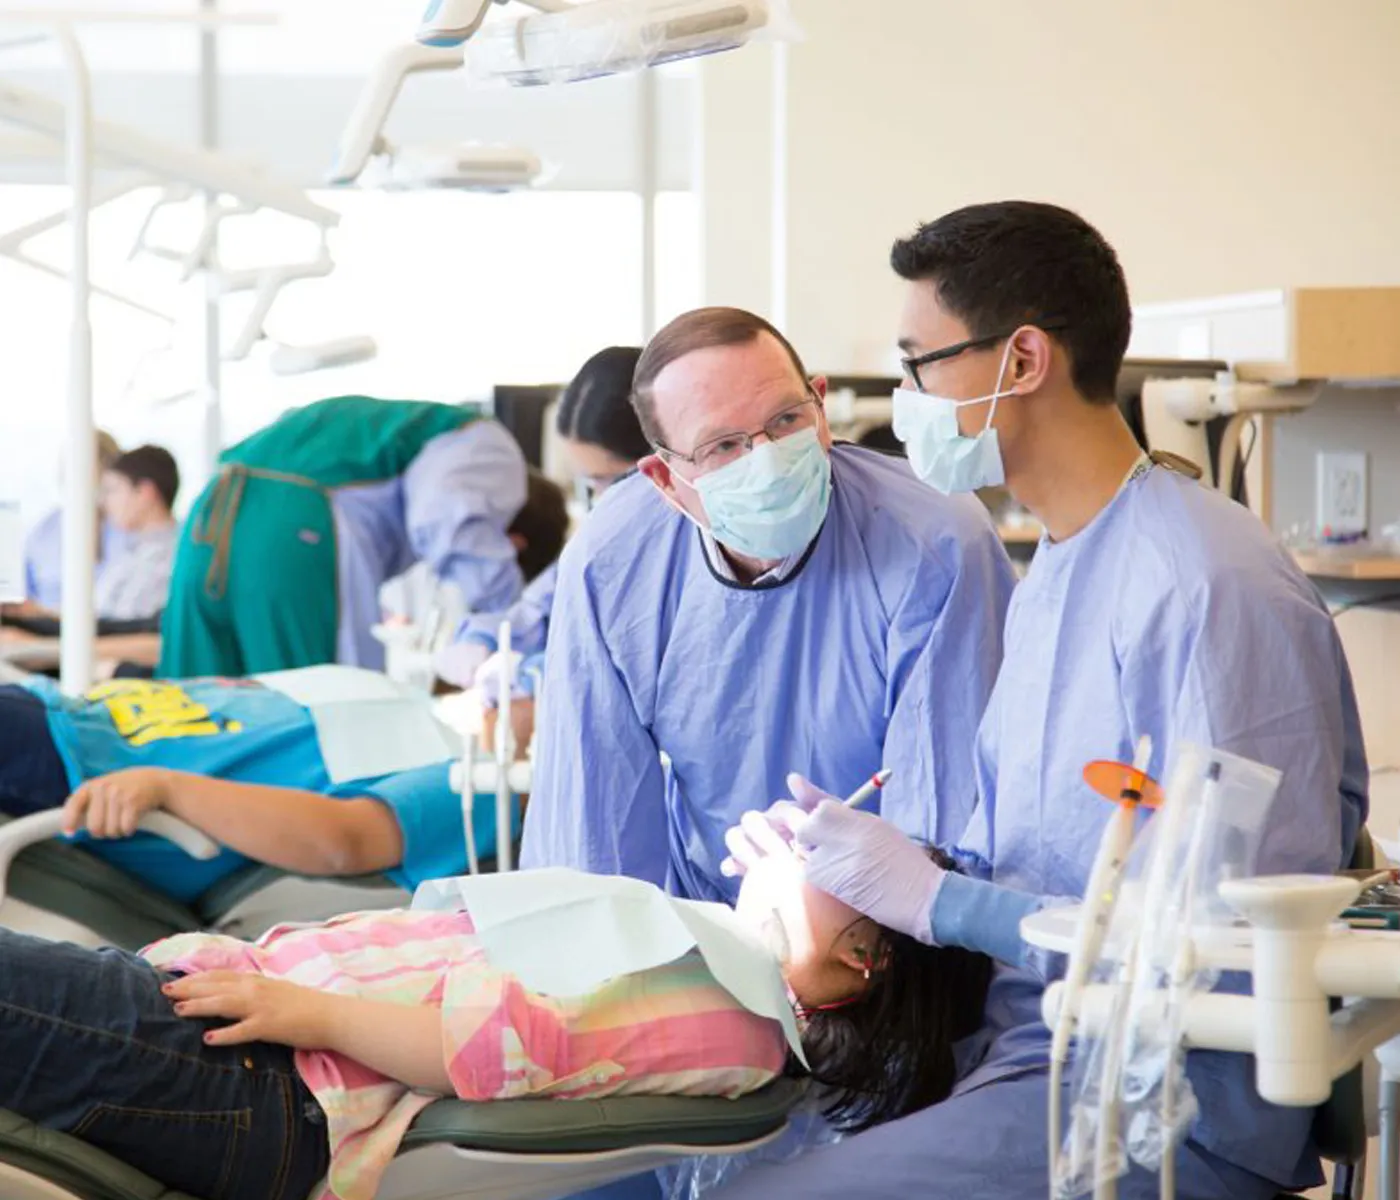 School of Dentistry student consults with faculty member while treating a young patient